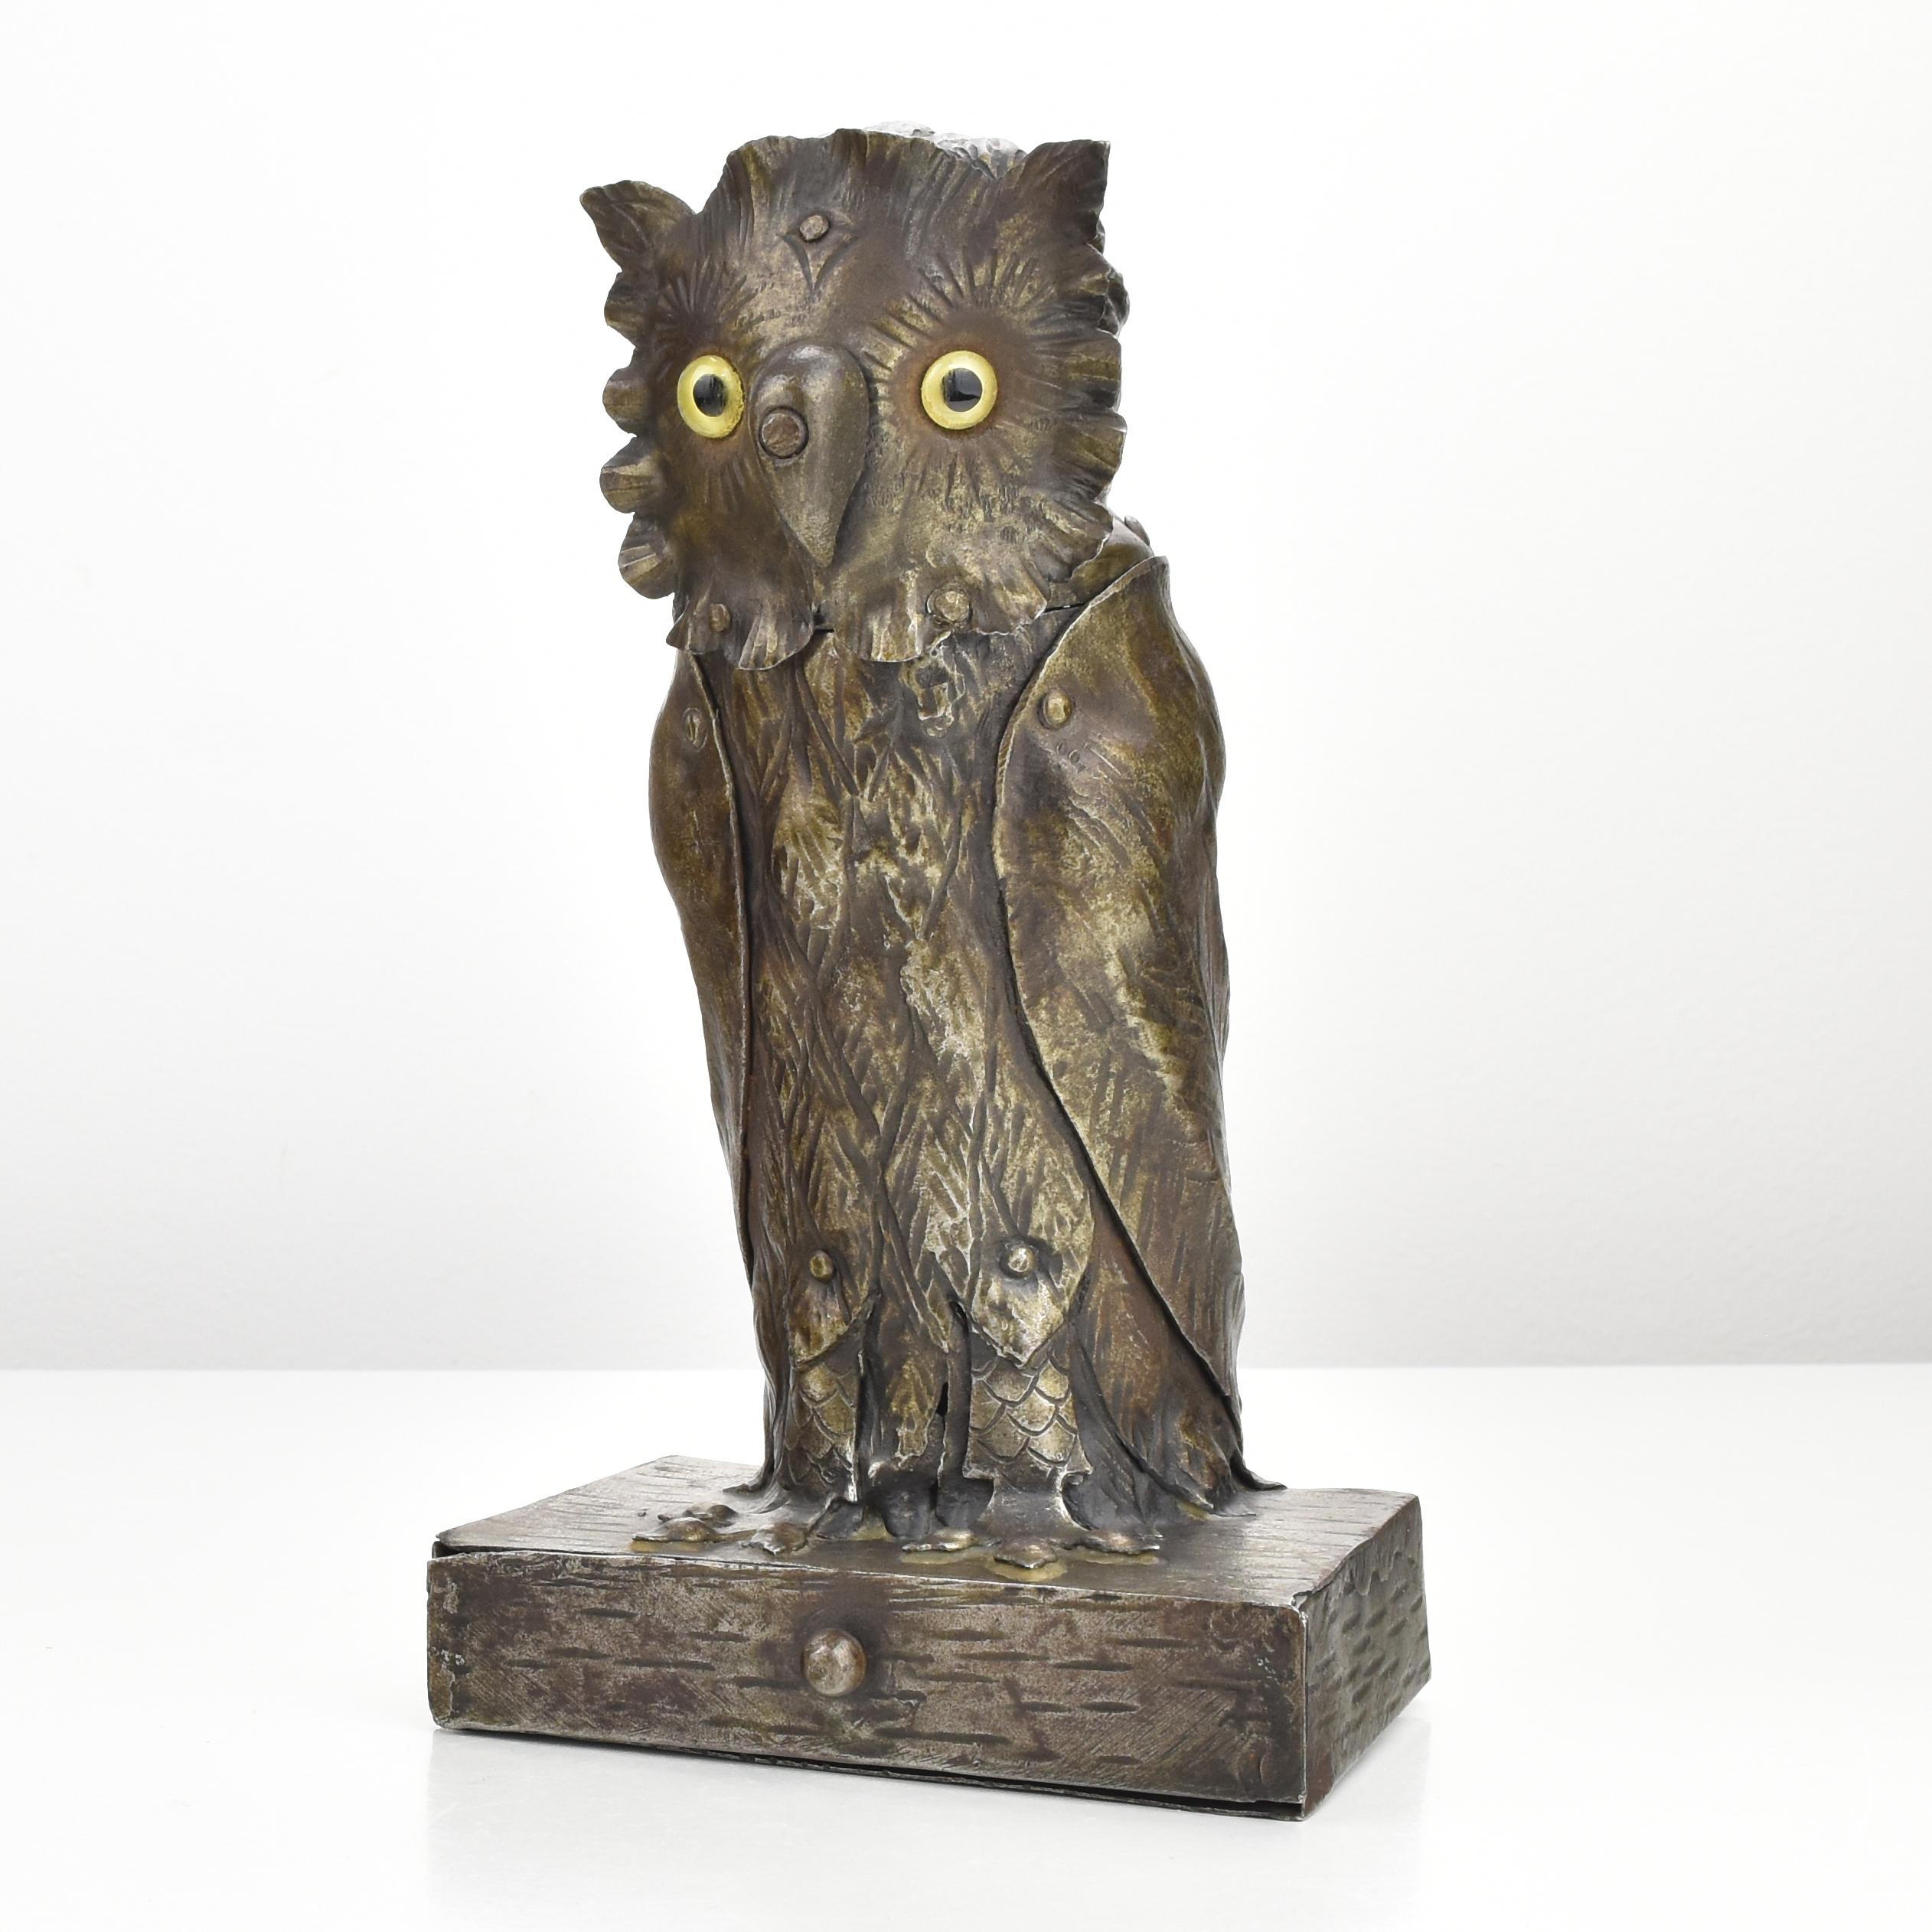 Fantastic hand-forged Arts & Crafts figural Inkwell in shape of an owl, believed to be made by Goberg ~ 1900. The owl is made of forged iron with a lovely patina and bears yellow glass eyes. The head is hinged to get access to the inkwell and the